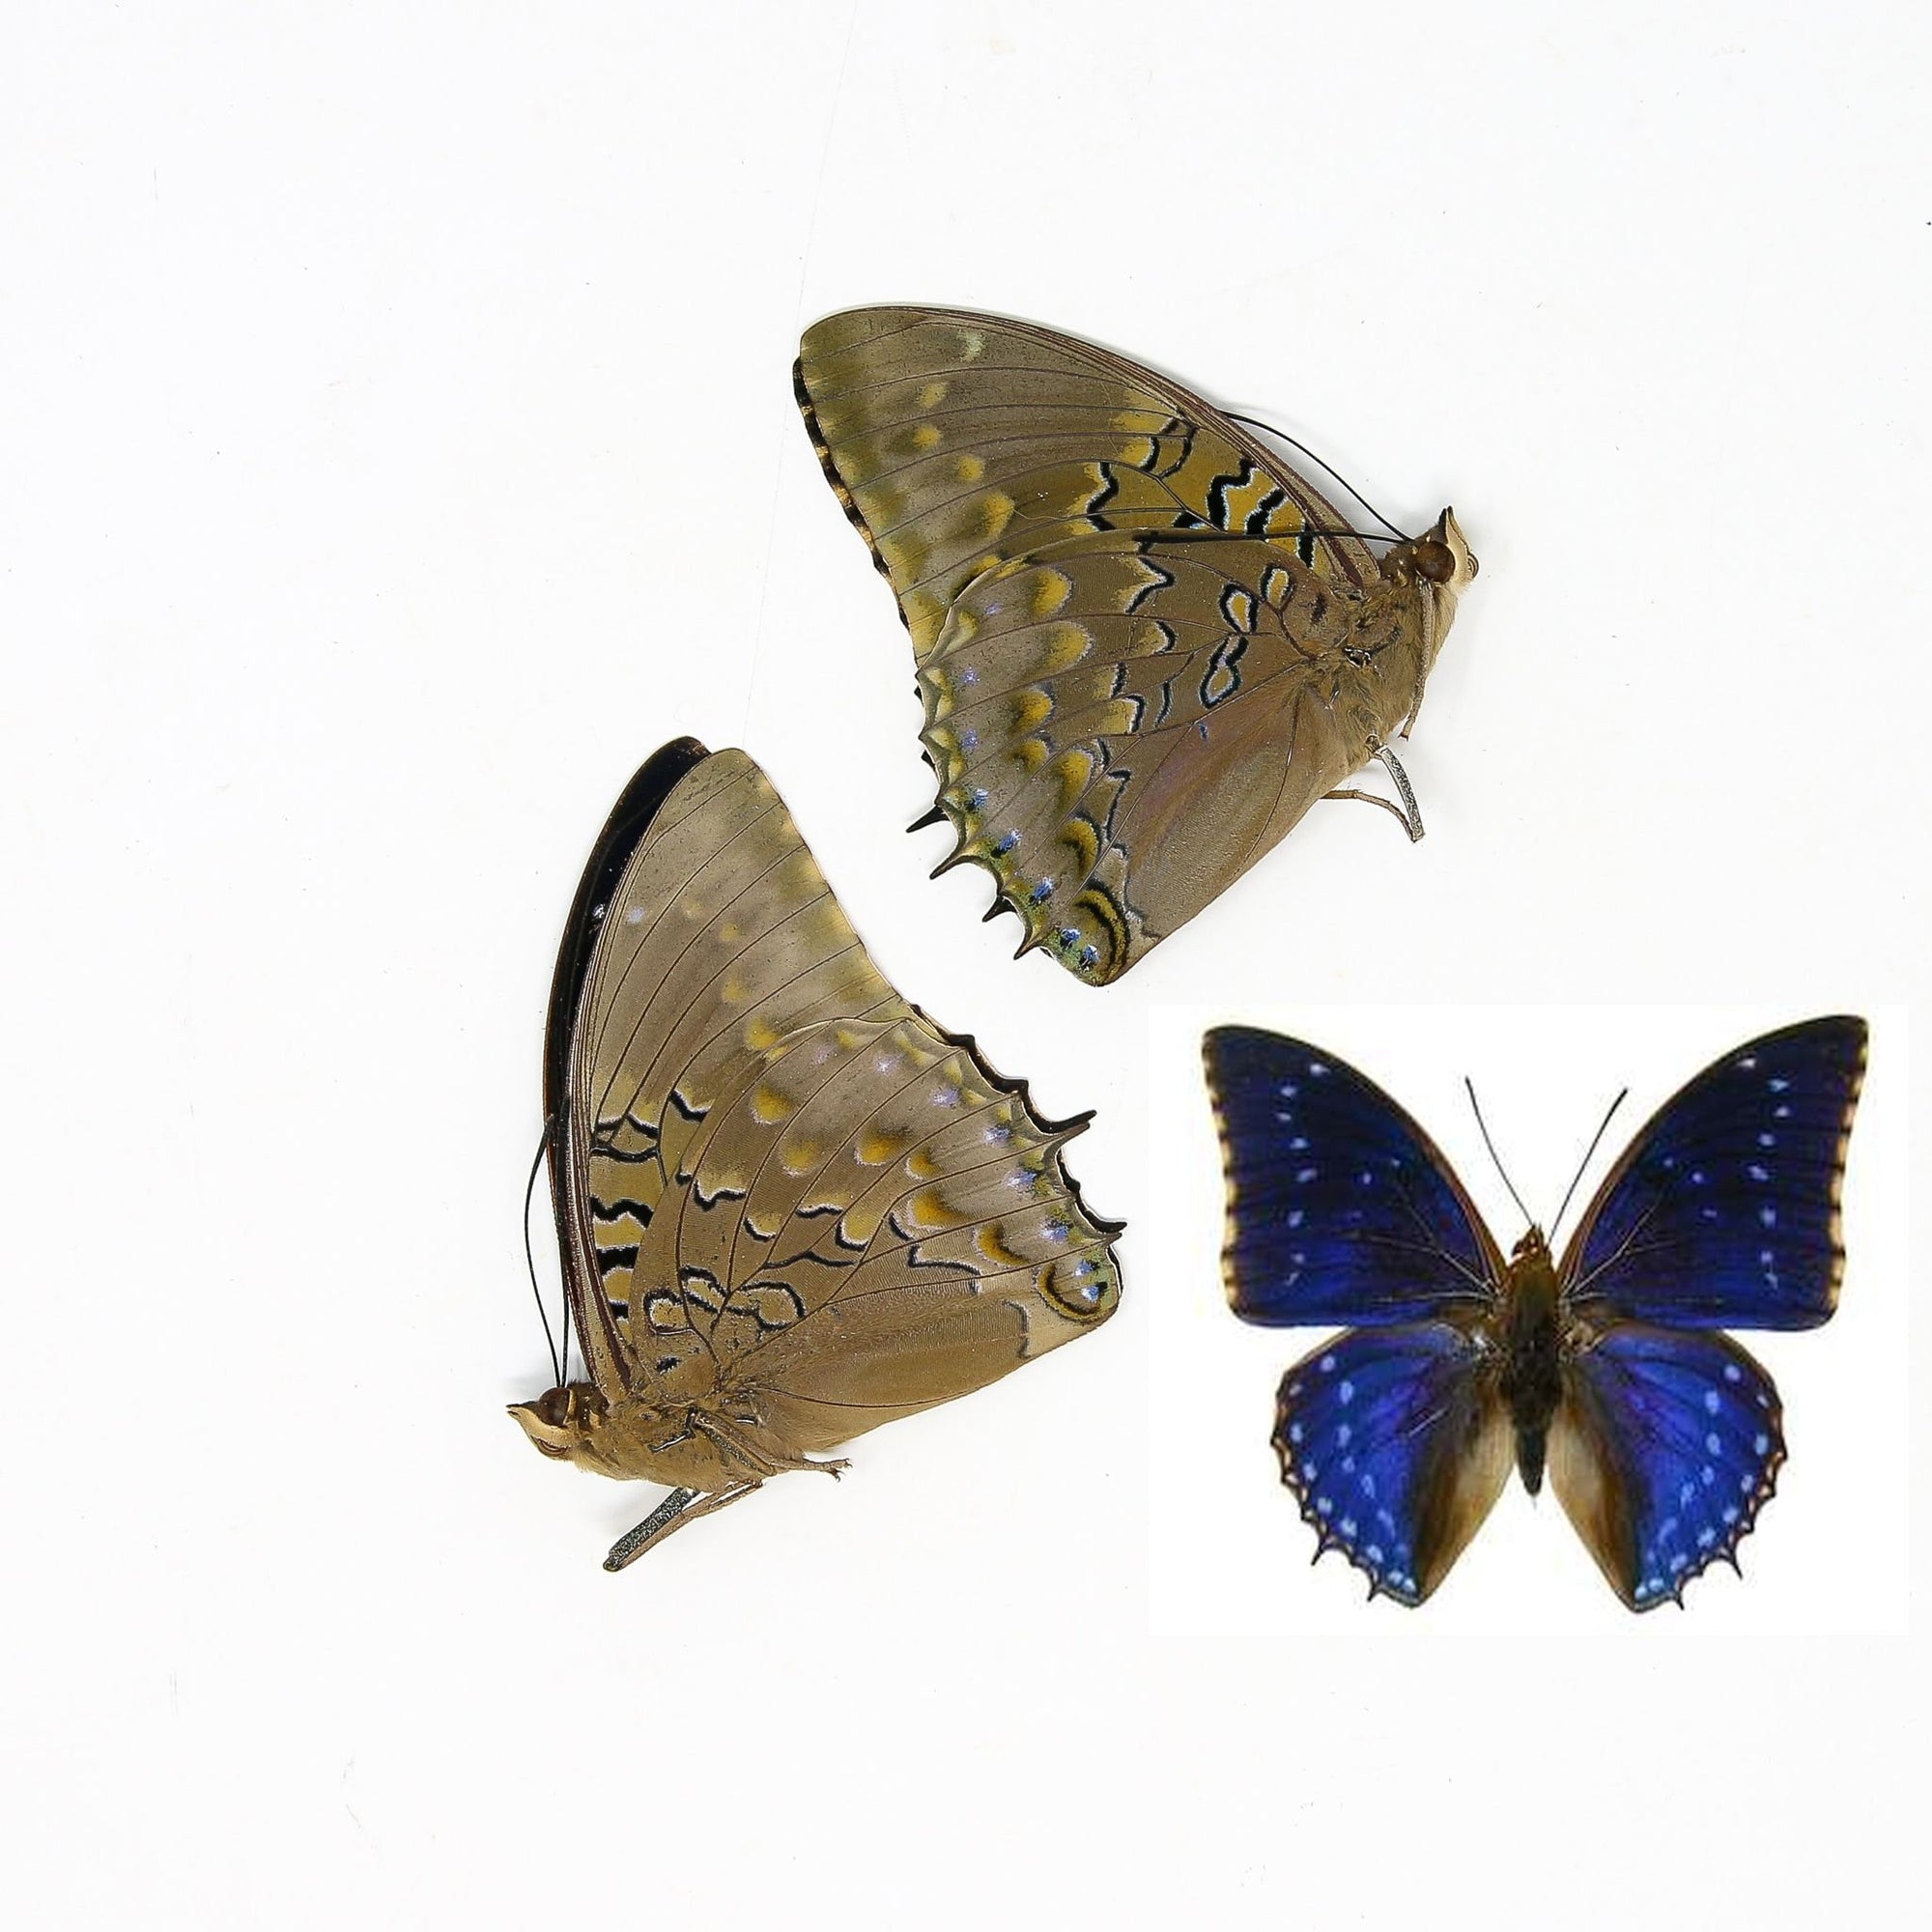 Two (2) Charaxes tiridates "African Blue" A1 Real Dry-Preserved Butterflies, Unmounted Entomology Taxidermy Specimens